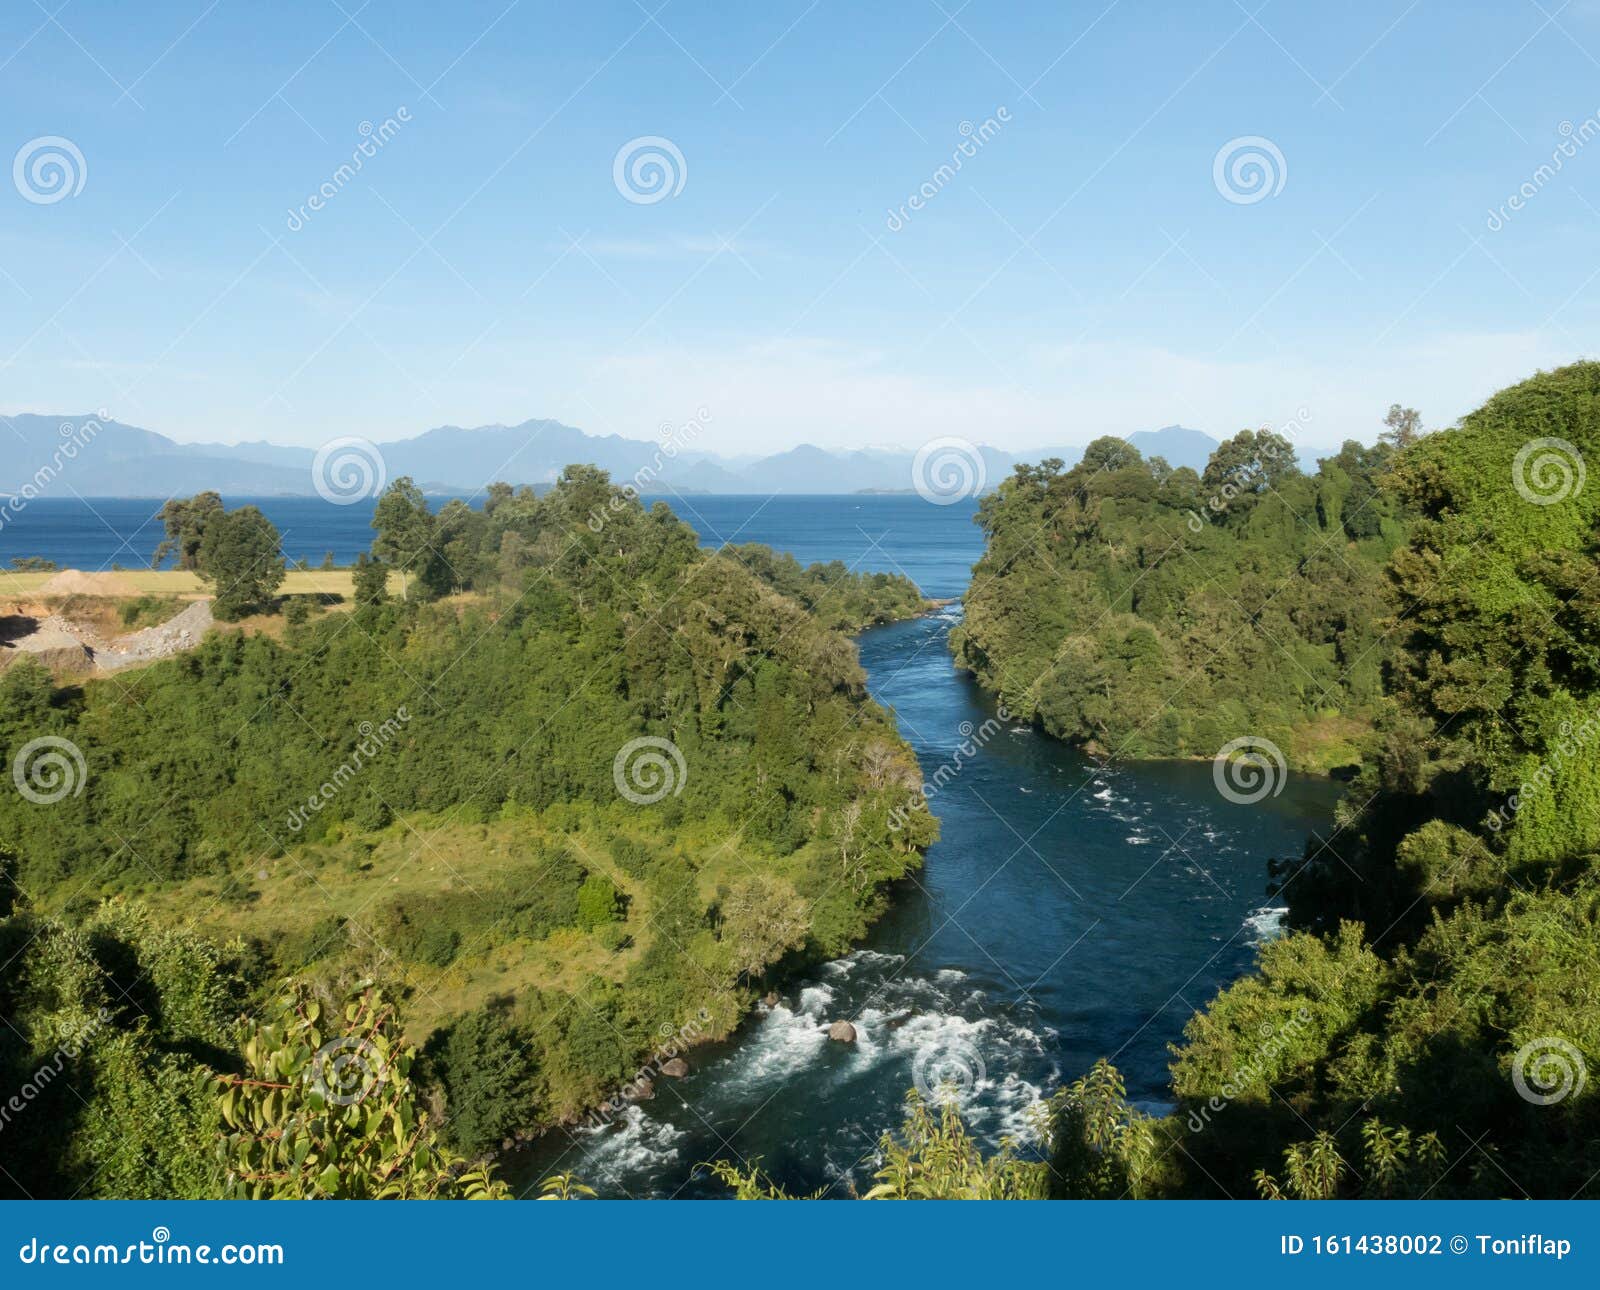 birth of the rio bueno, leaving lake ranco. in the region of los rios, in araucania or patagonia, chilean andes. south of chile